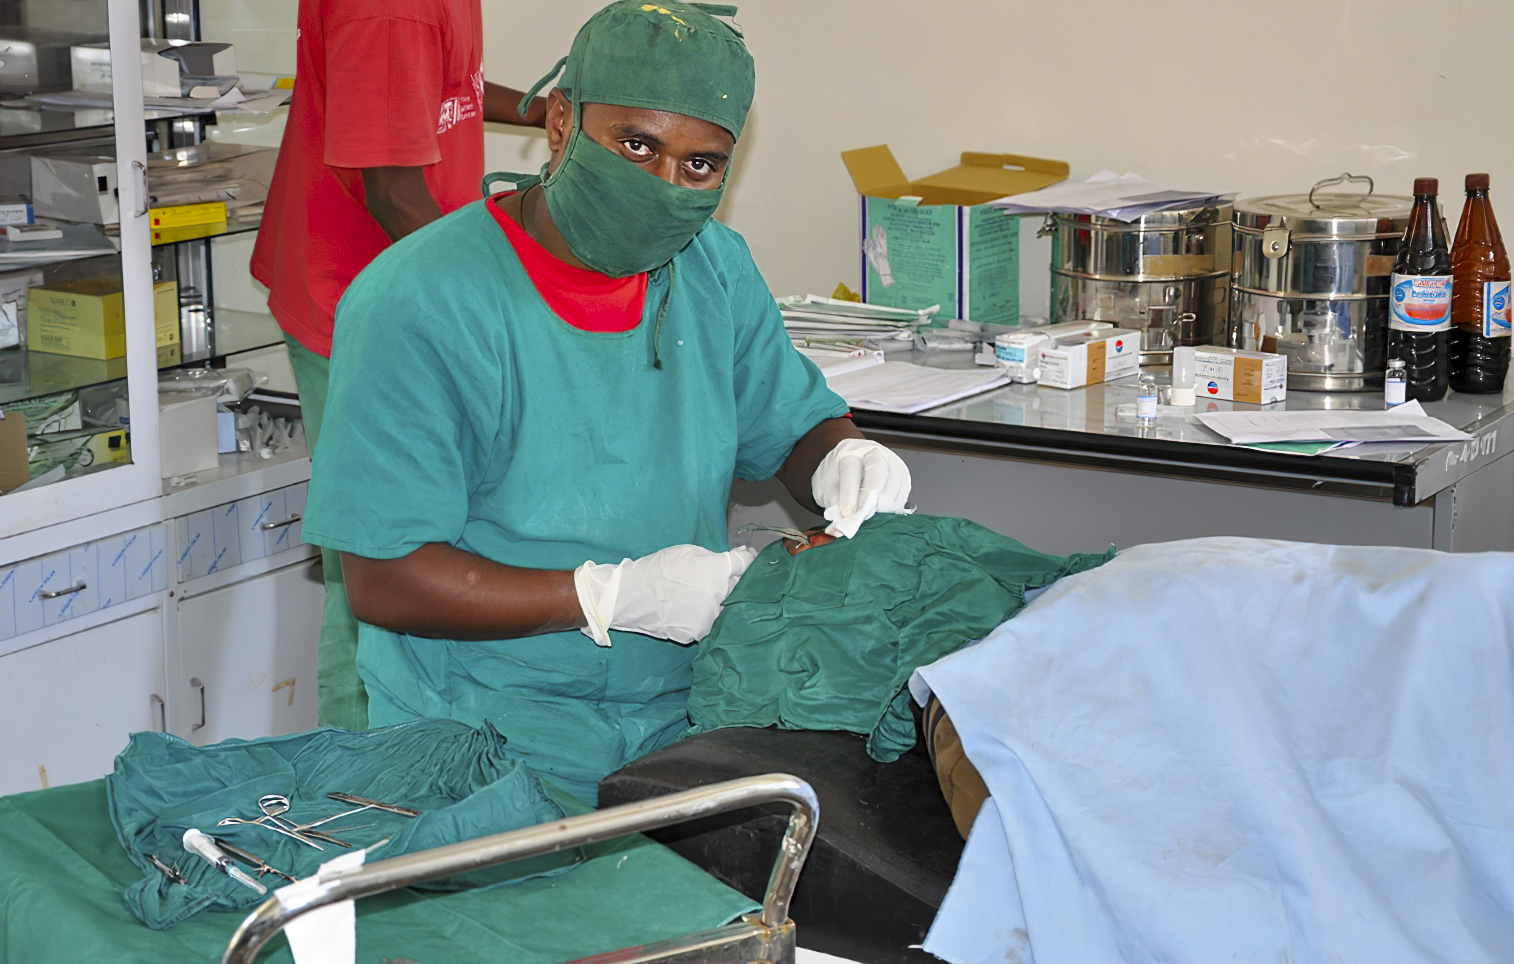 Sight-saving eye surgery has been suspended in Ethiopia due to COVID-19.